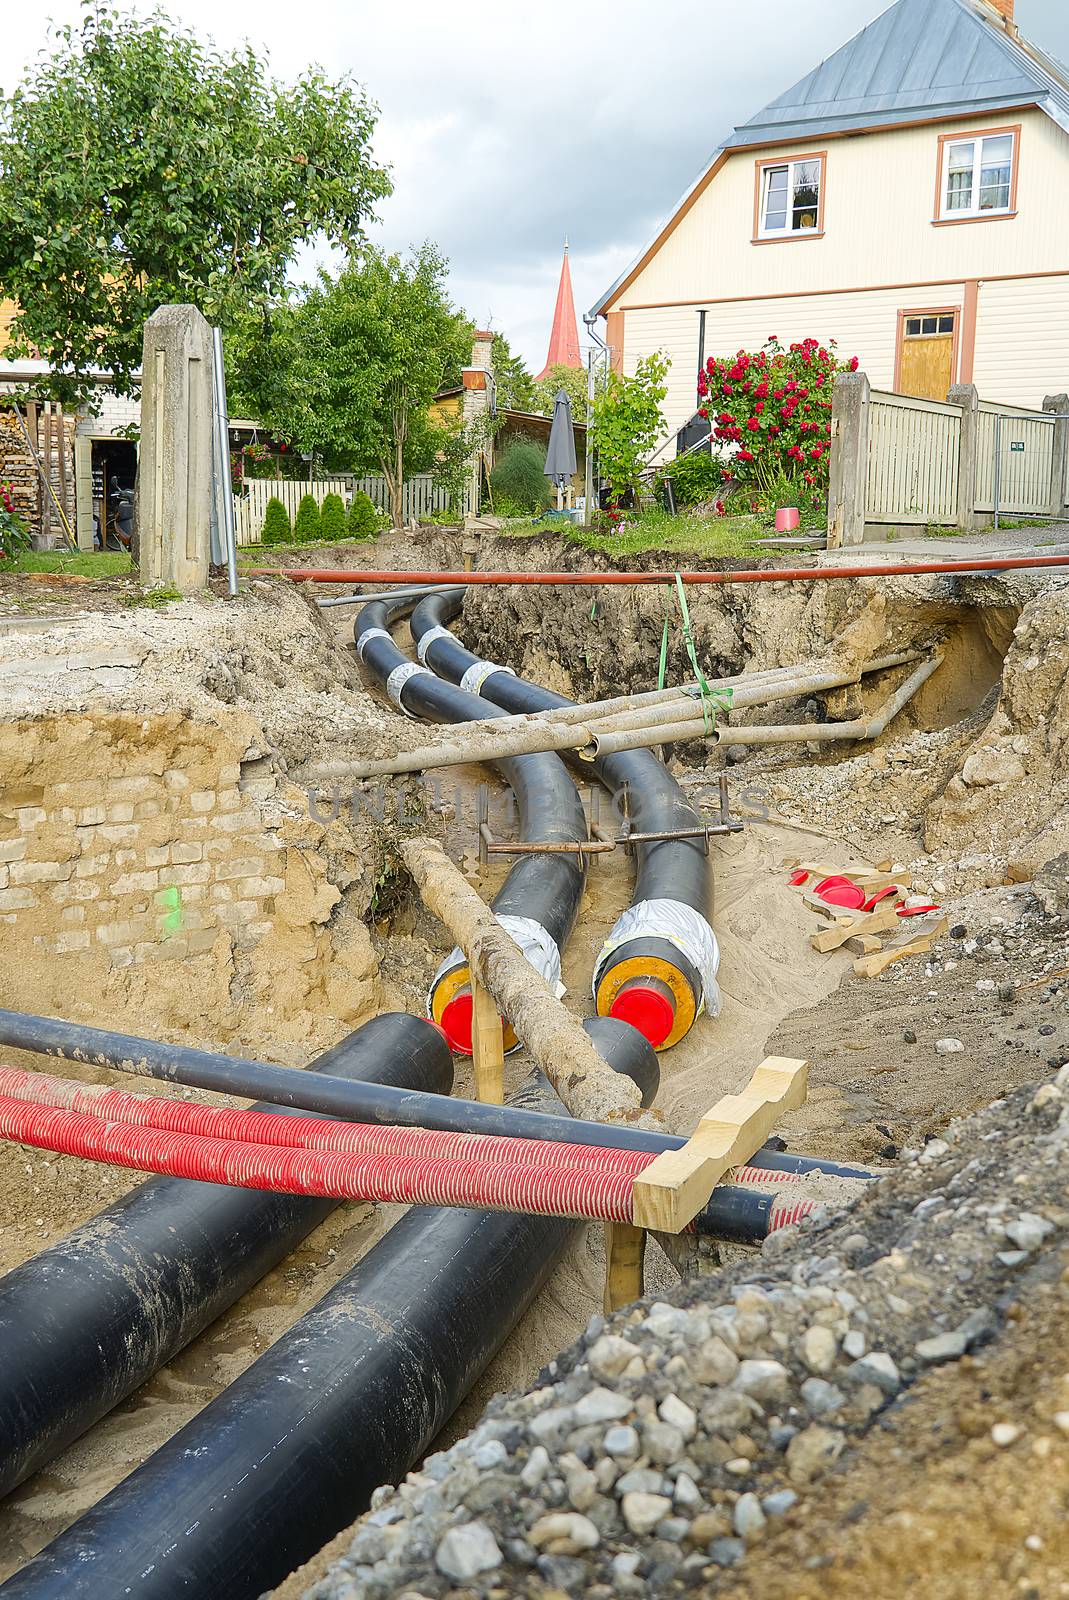 underground heating system pipes replacement on the city street among the houses